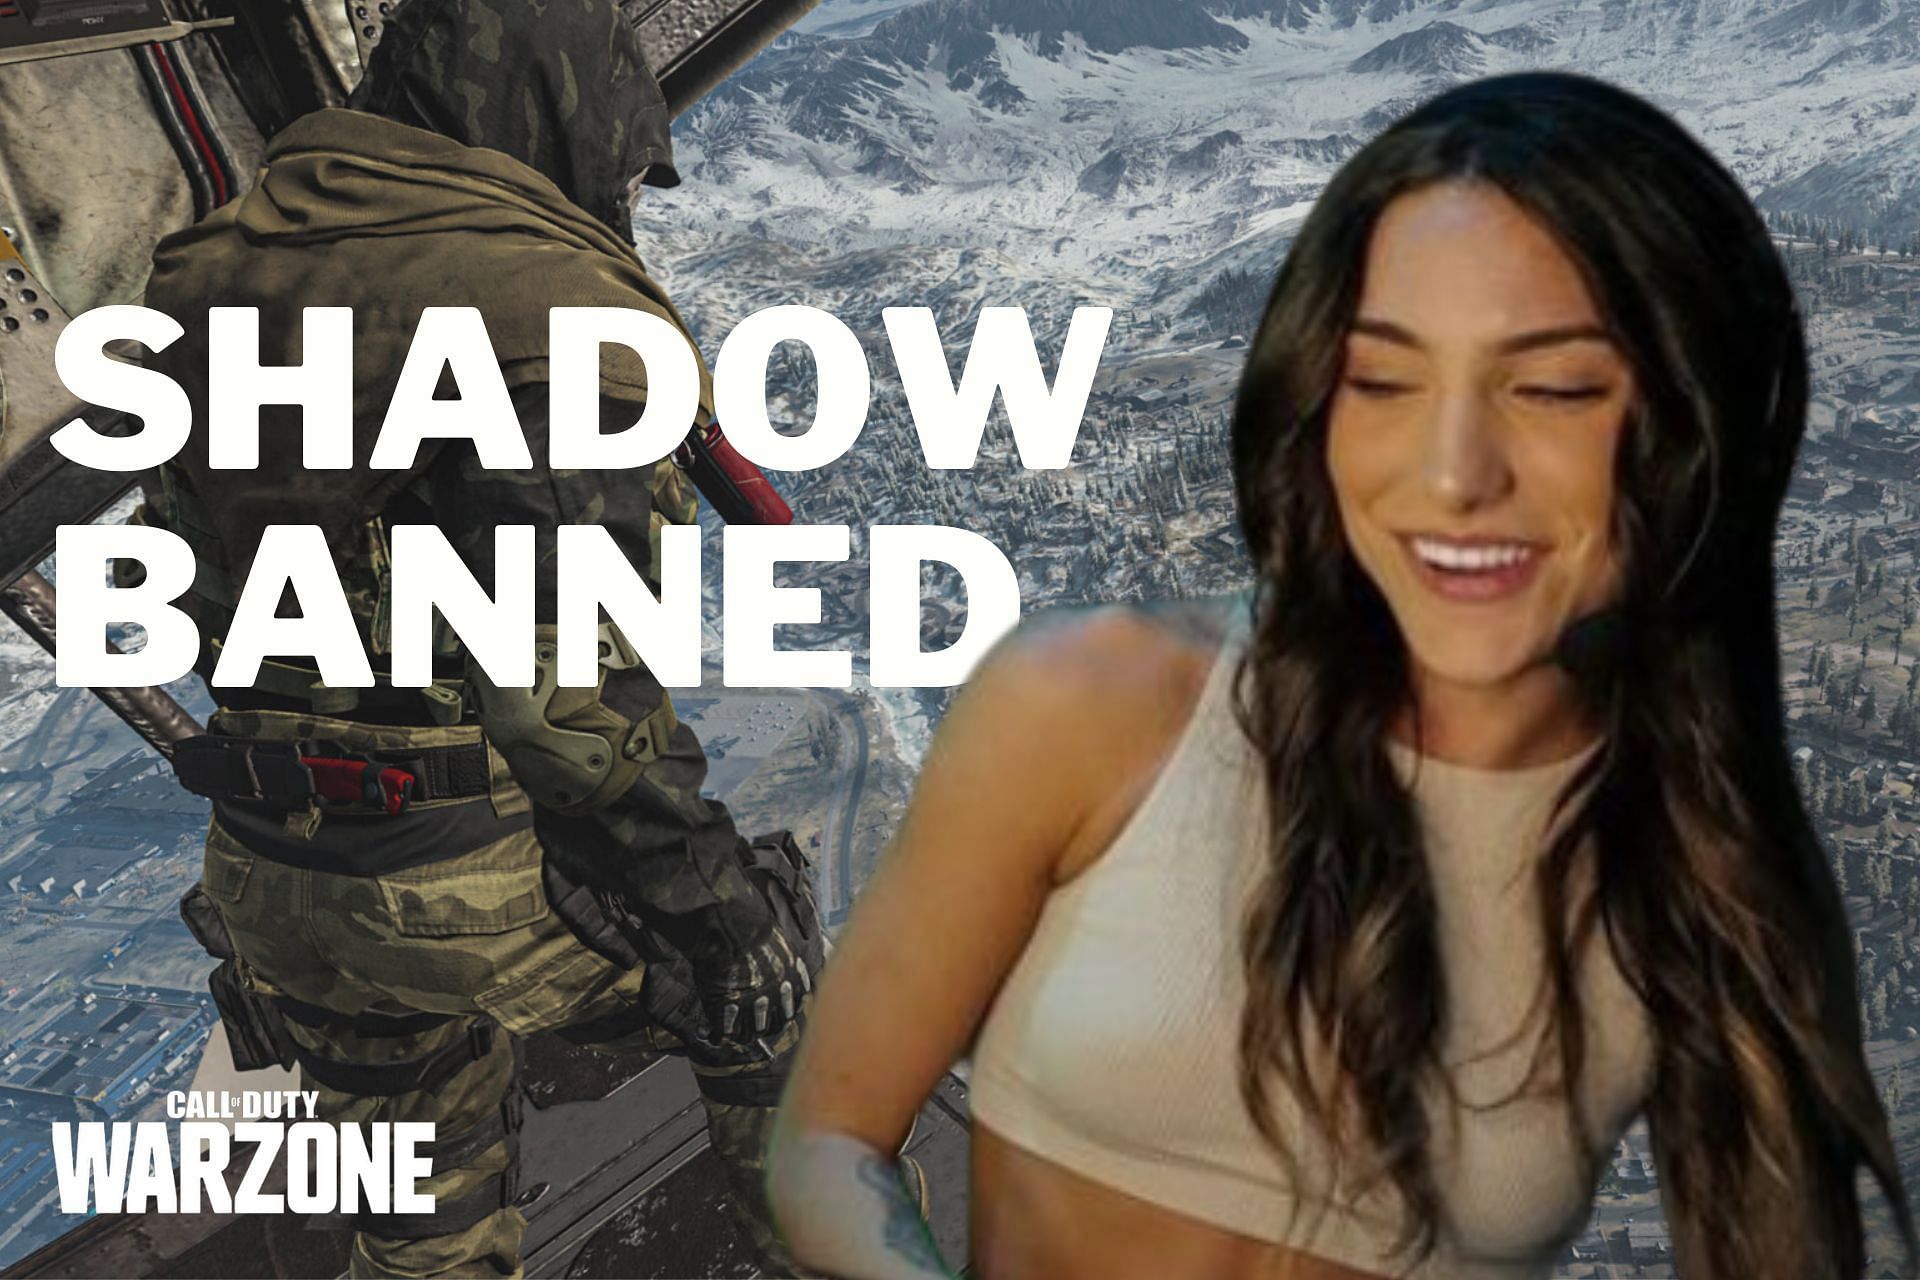 Call of Duty: Warzone streamer Nadia has allegedly been shadow banned from the game (Image via Sportskeeda)